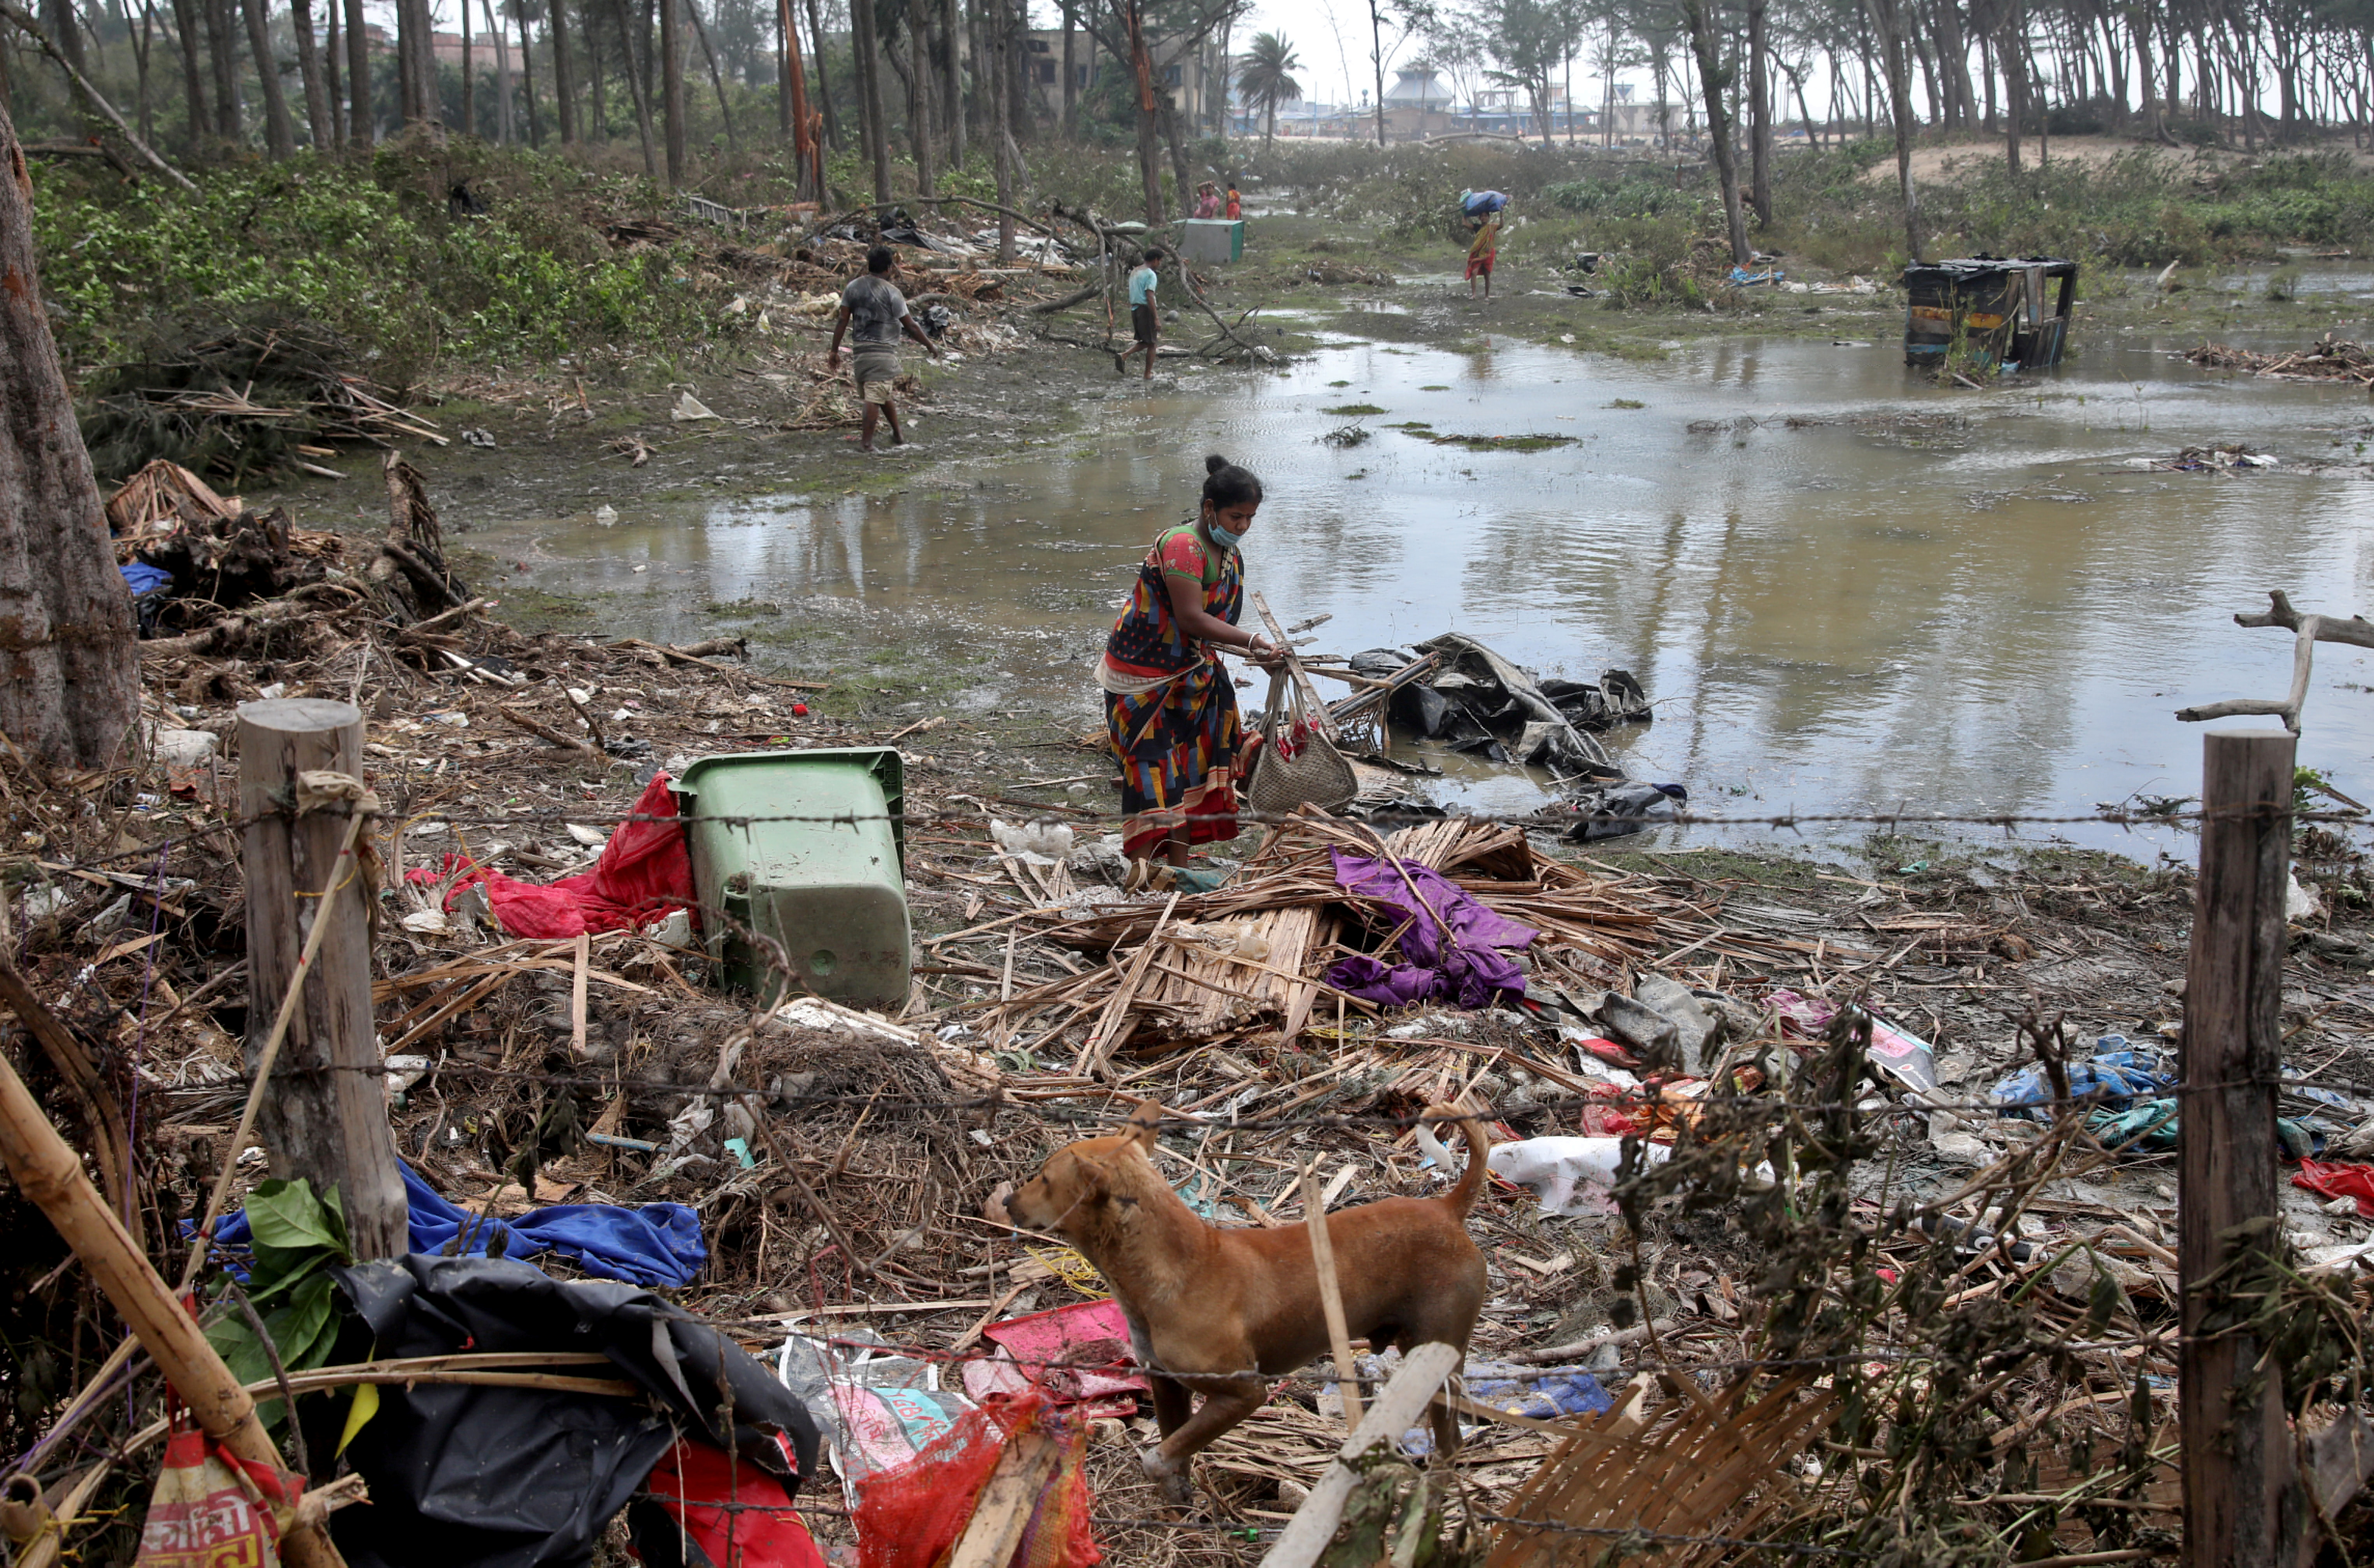 A woman salvages her belongings near her damaged hut following Cyclone Yaas in Digha, Purba Medinipur district in the eastern state of West Bengal, India, May 27, 2021. REUTERS/Rupak De Chowdhuri